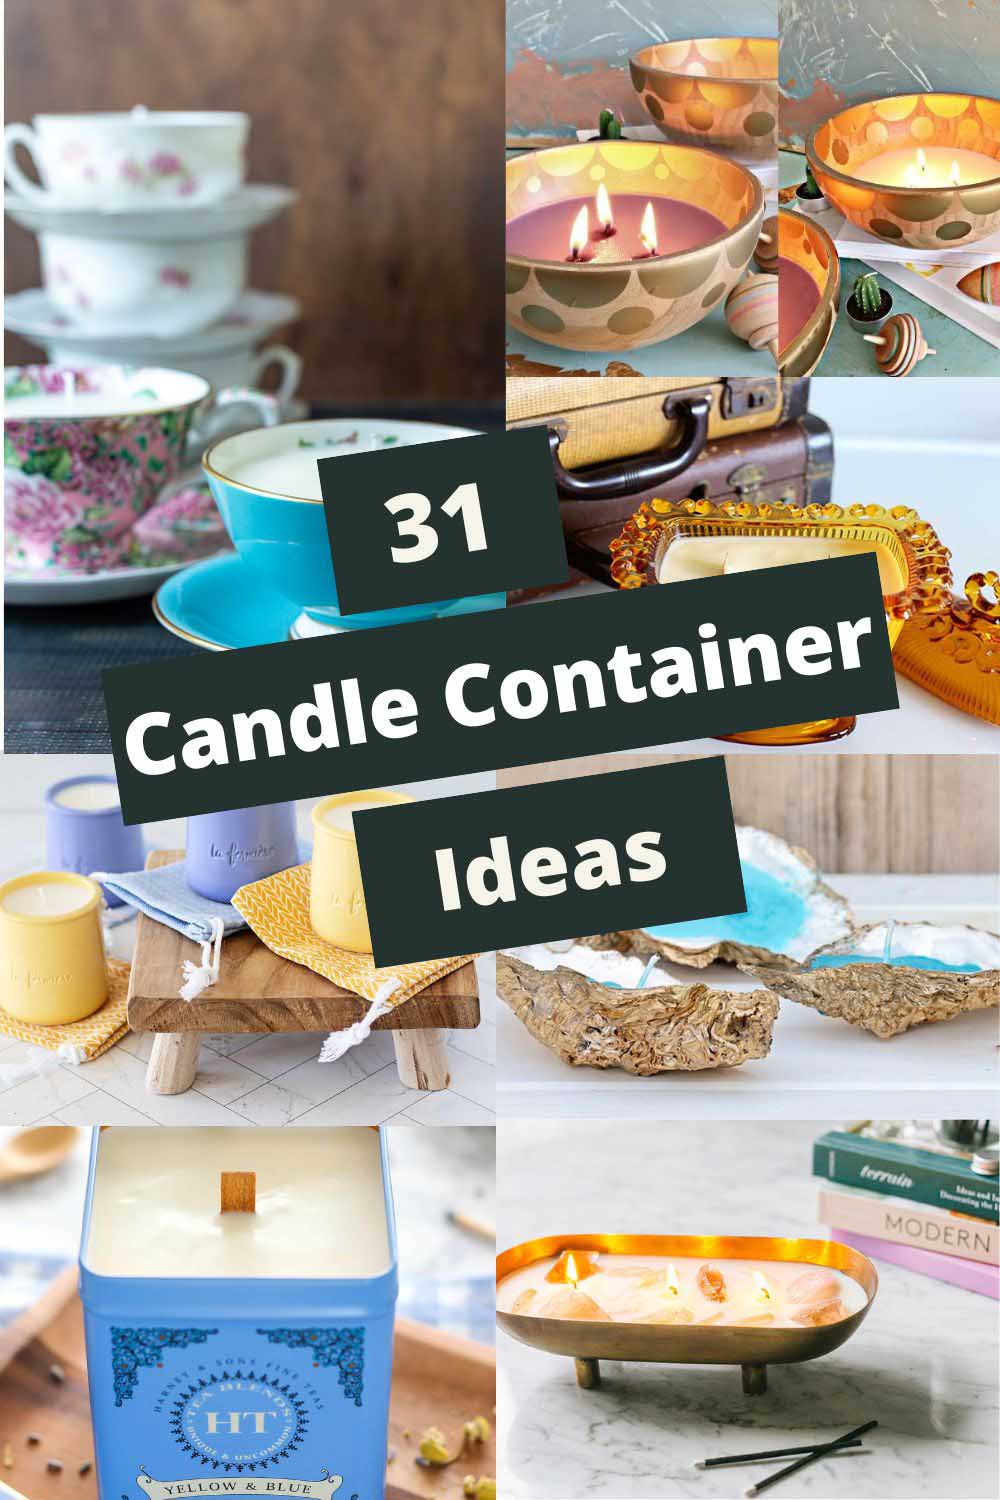 Candle container ideas